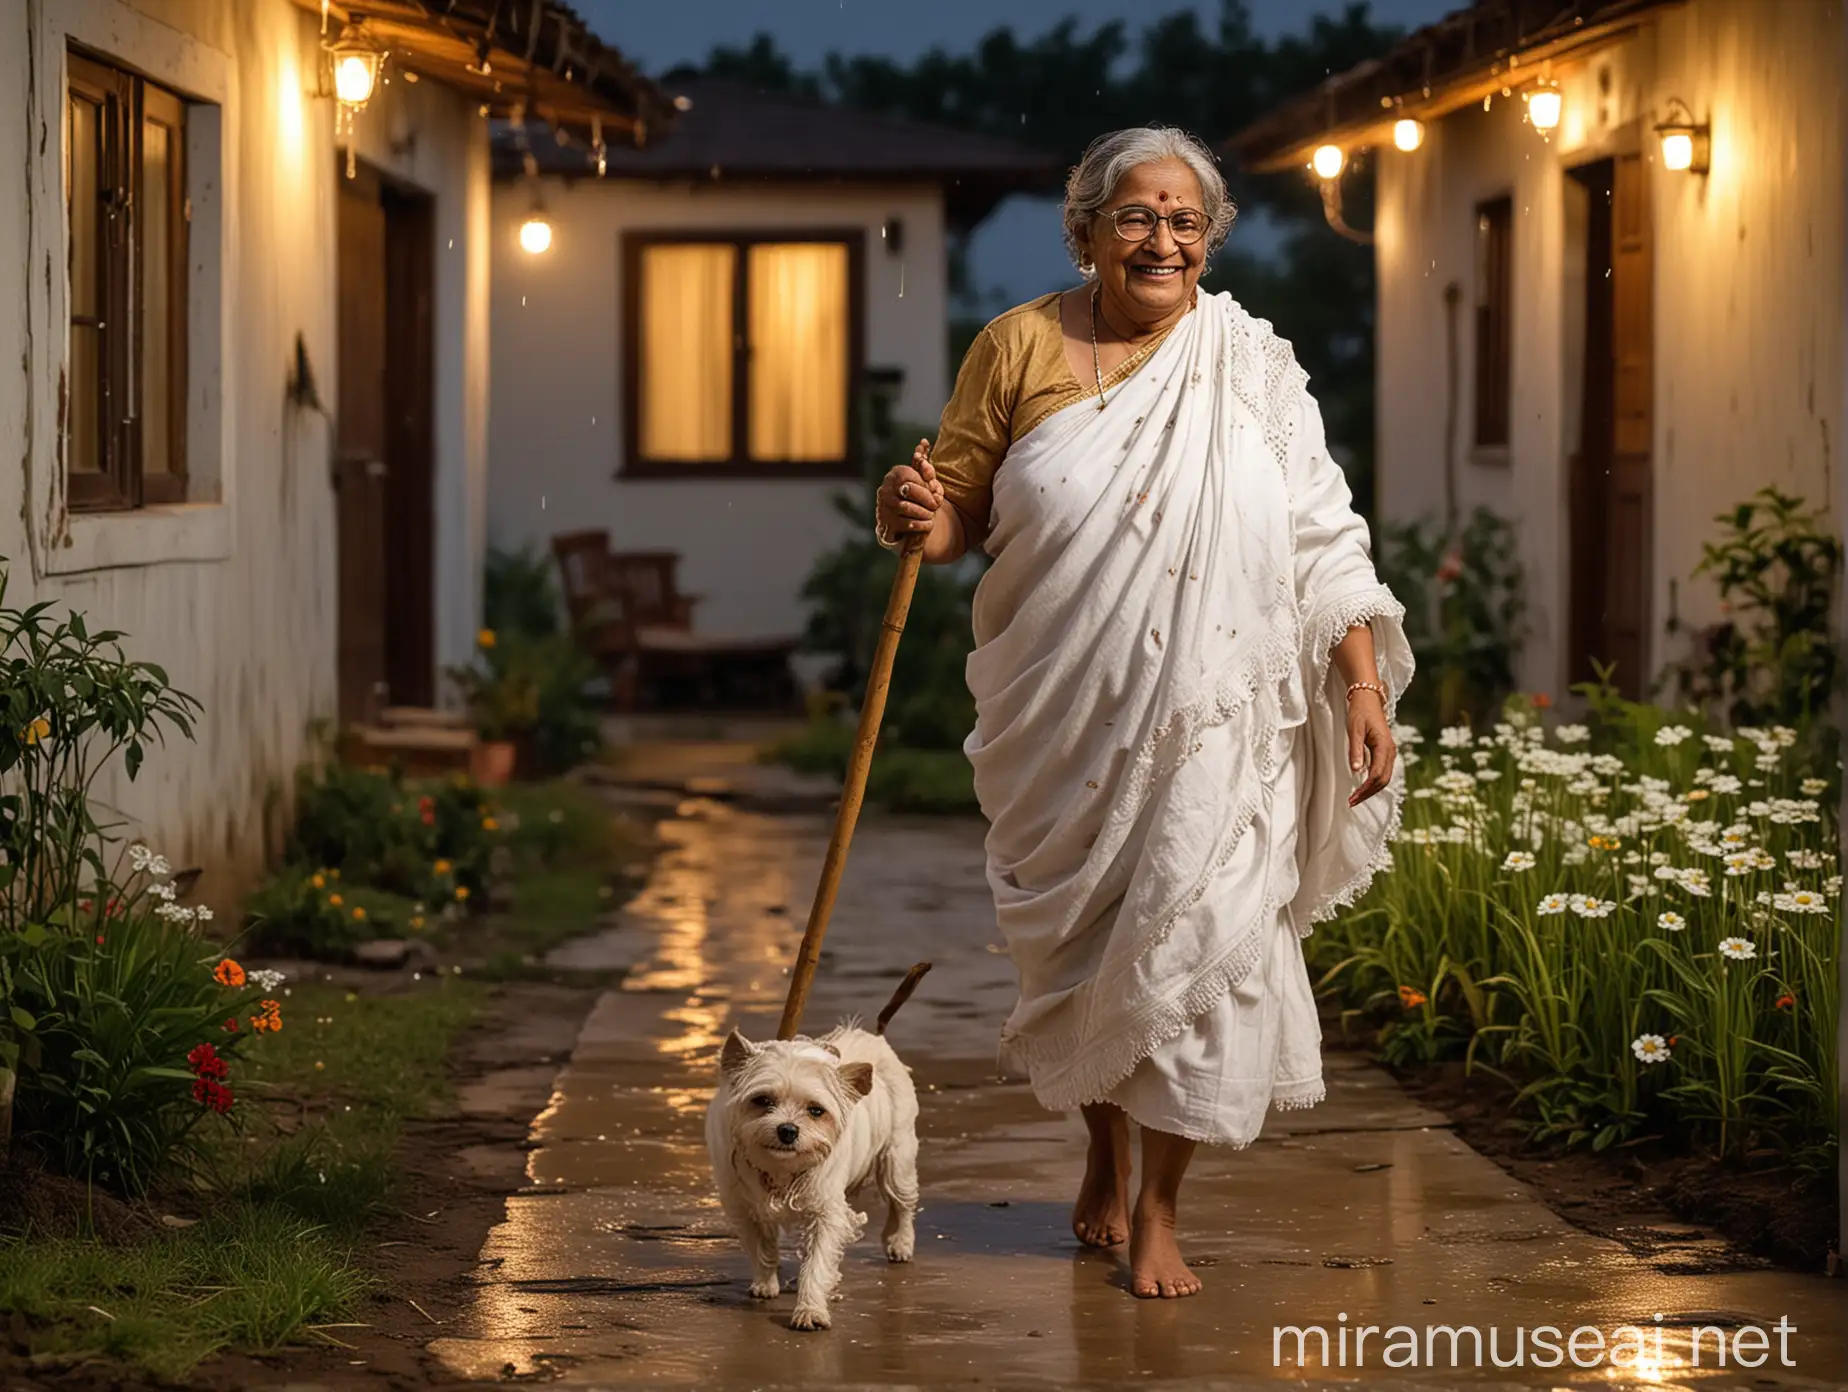 
sweet faced old desi indian very fat  age 70 woman walking with a  single stick wearing a white towel and a golden neck lace and a spectacles. she is happy and laughing . she is bending and standing with her dog  . its night  time and in background there is a luxurious farm house  with bulb light and luxurious house   with flowers and grass and concrete floor and its raining.
